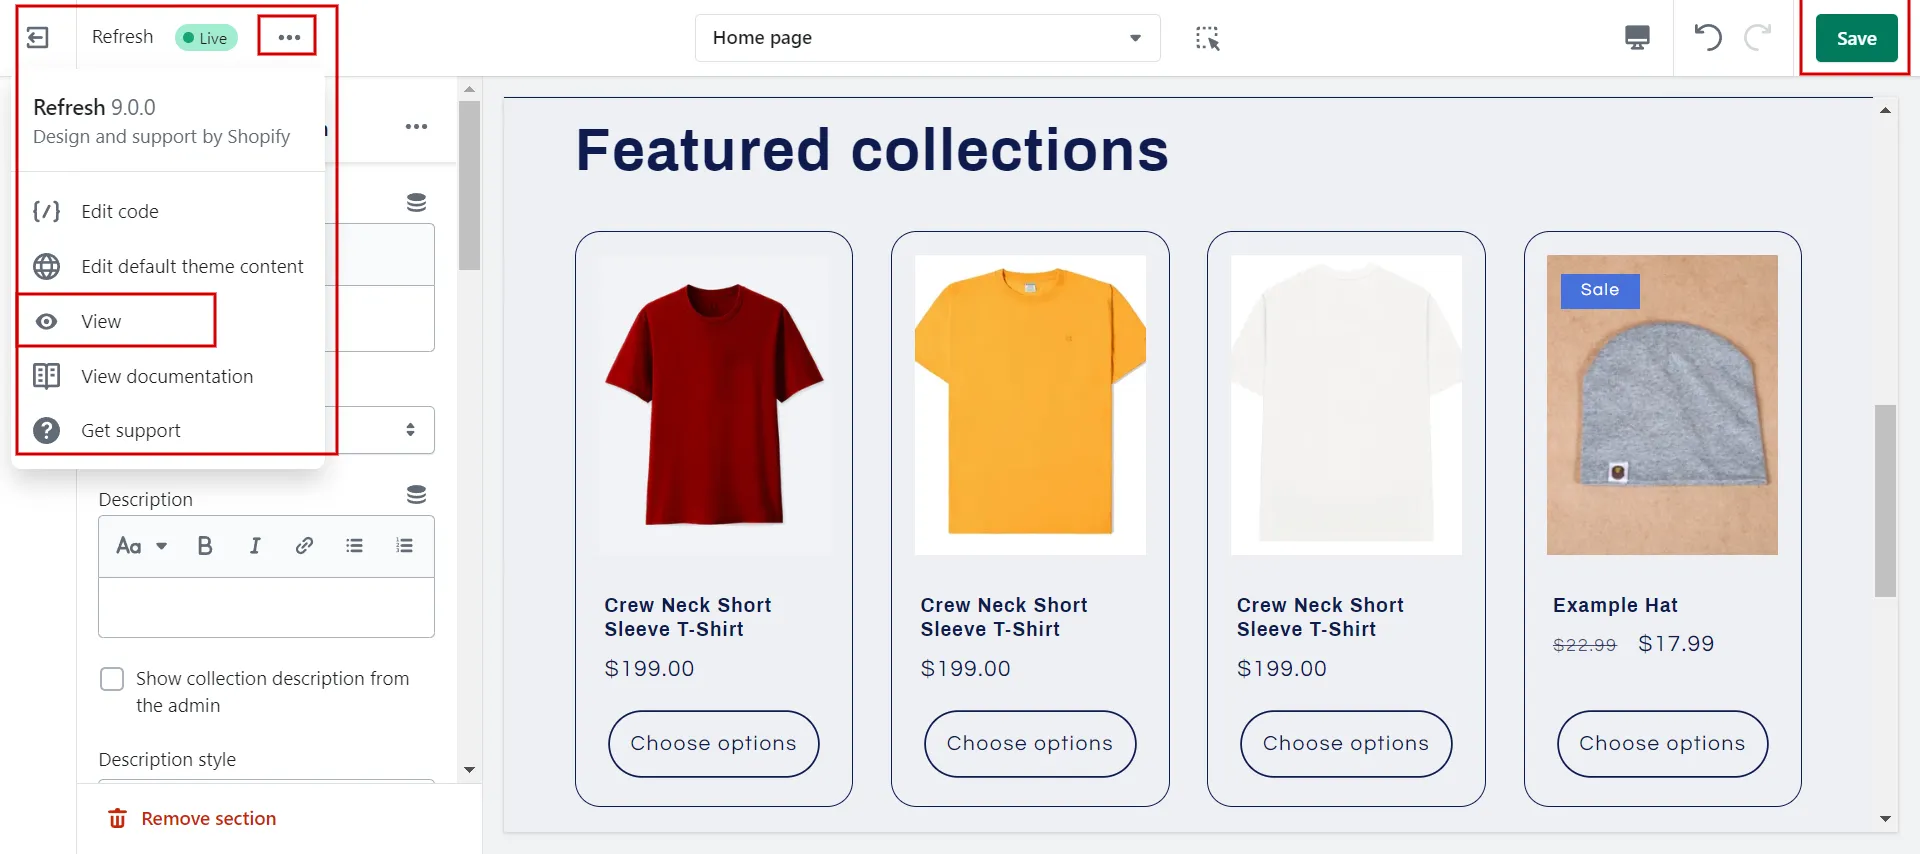 Recheck the featured collections on the front page